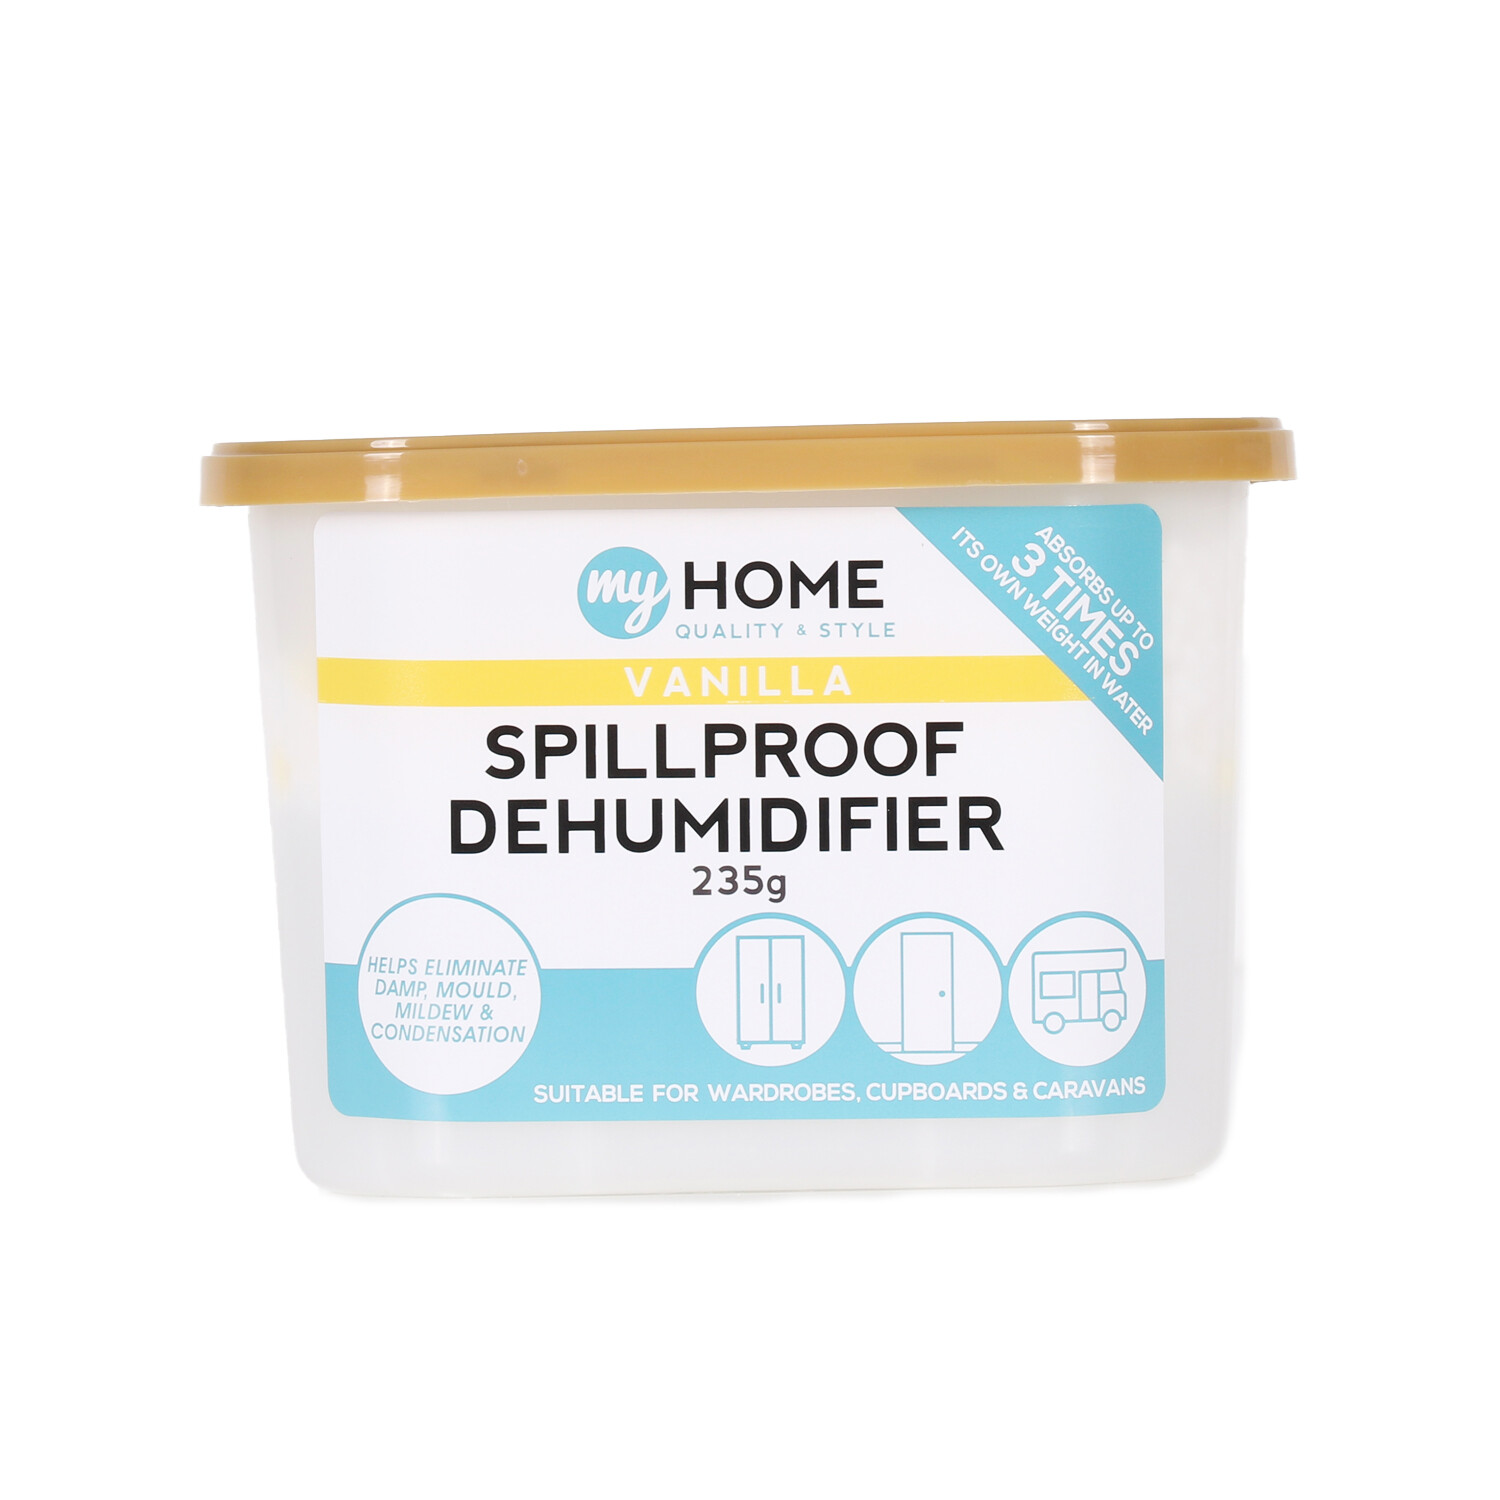 My Home Scented Spillproof Dehumidifier 235g Image 4